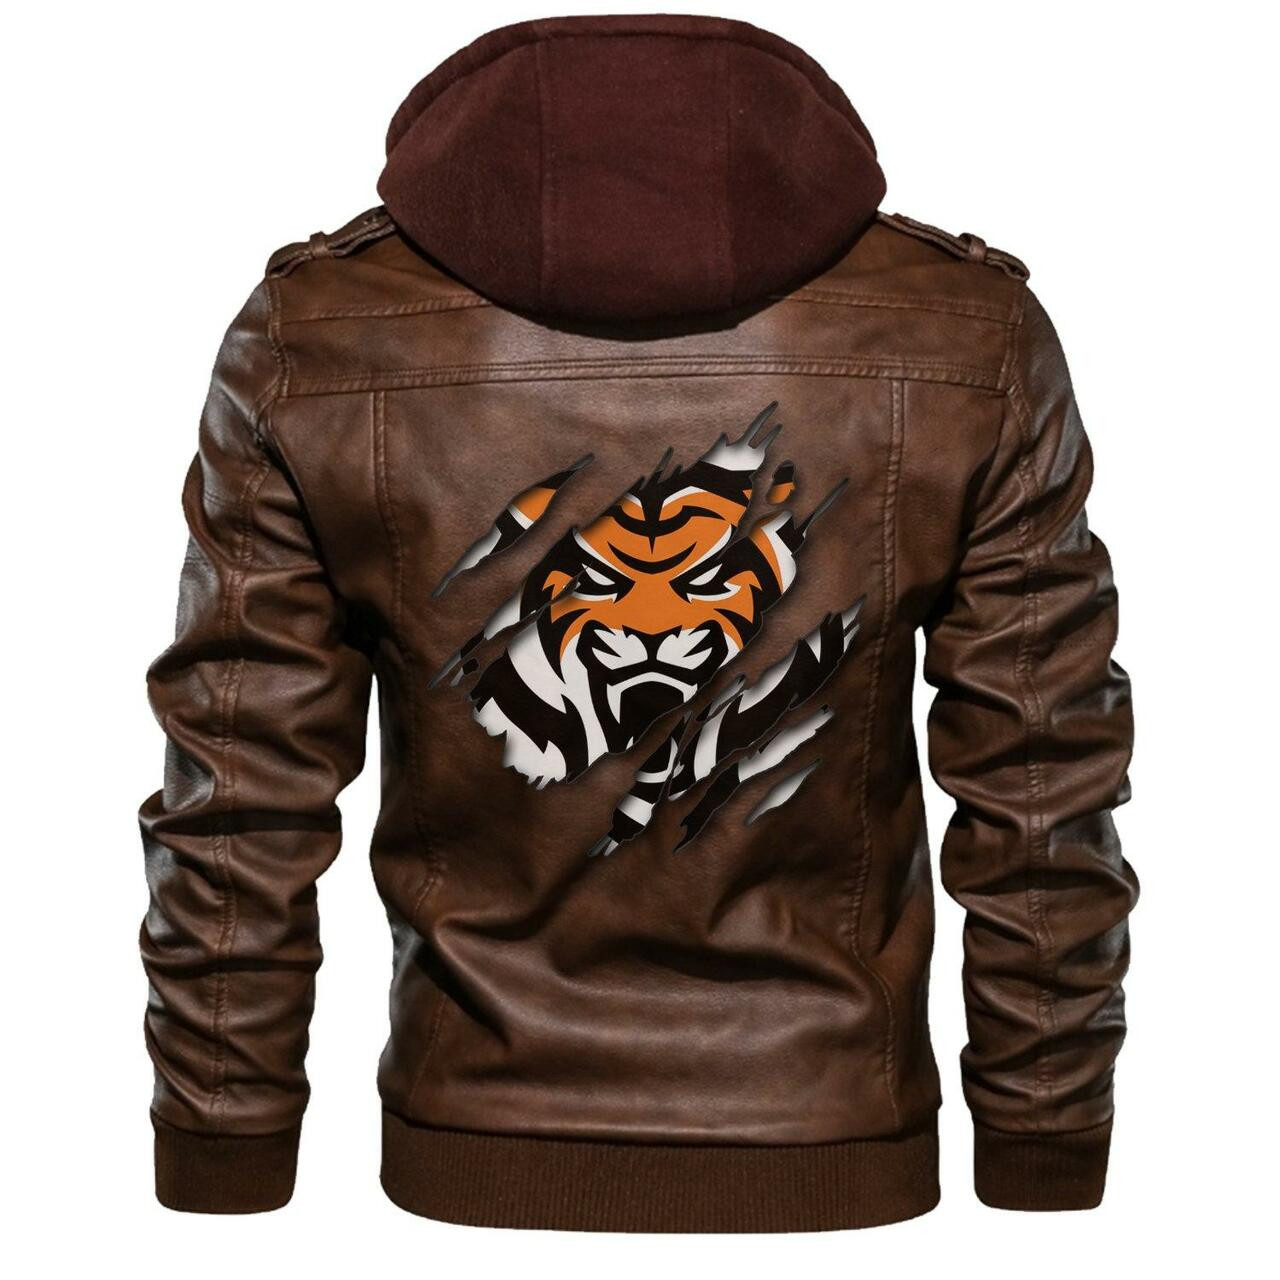 You can find a good leather jacket by access our website 34